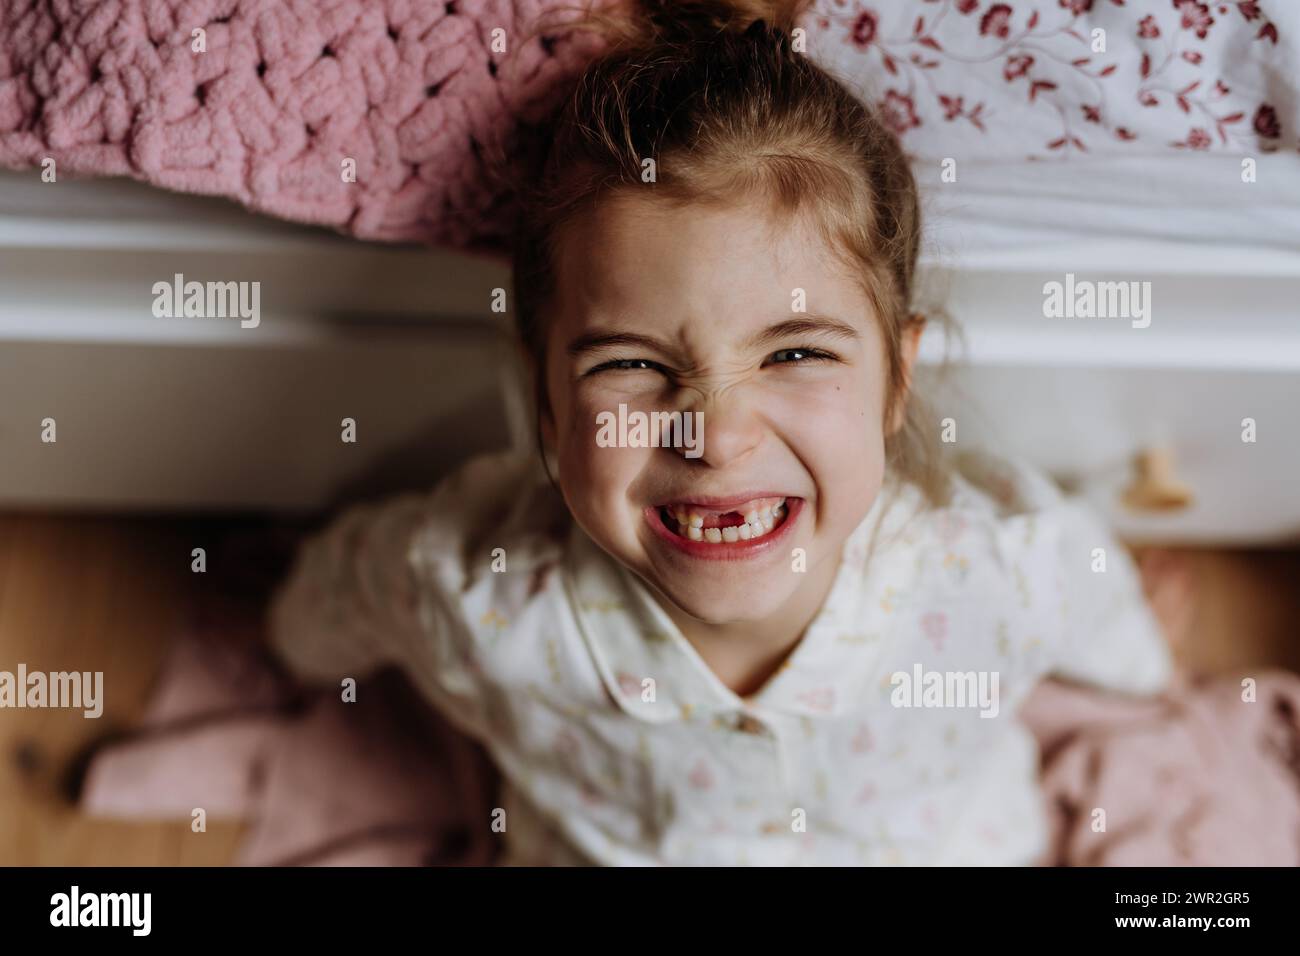 Portrait of cute girl smiling with gap-toothed grin, missing her baby teeth. Stock Photo